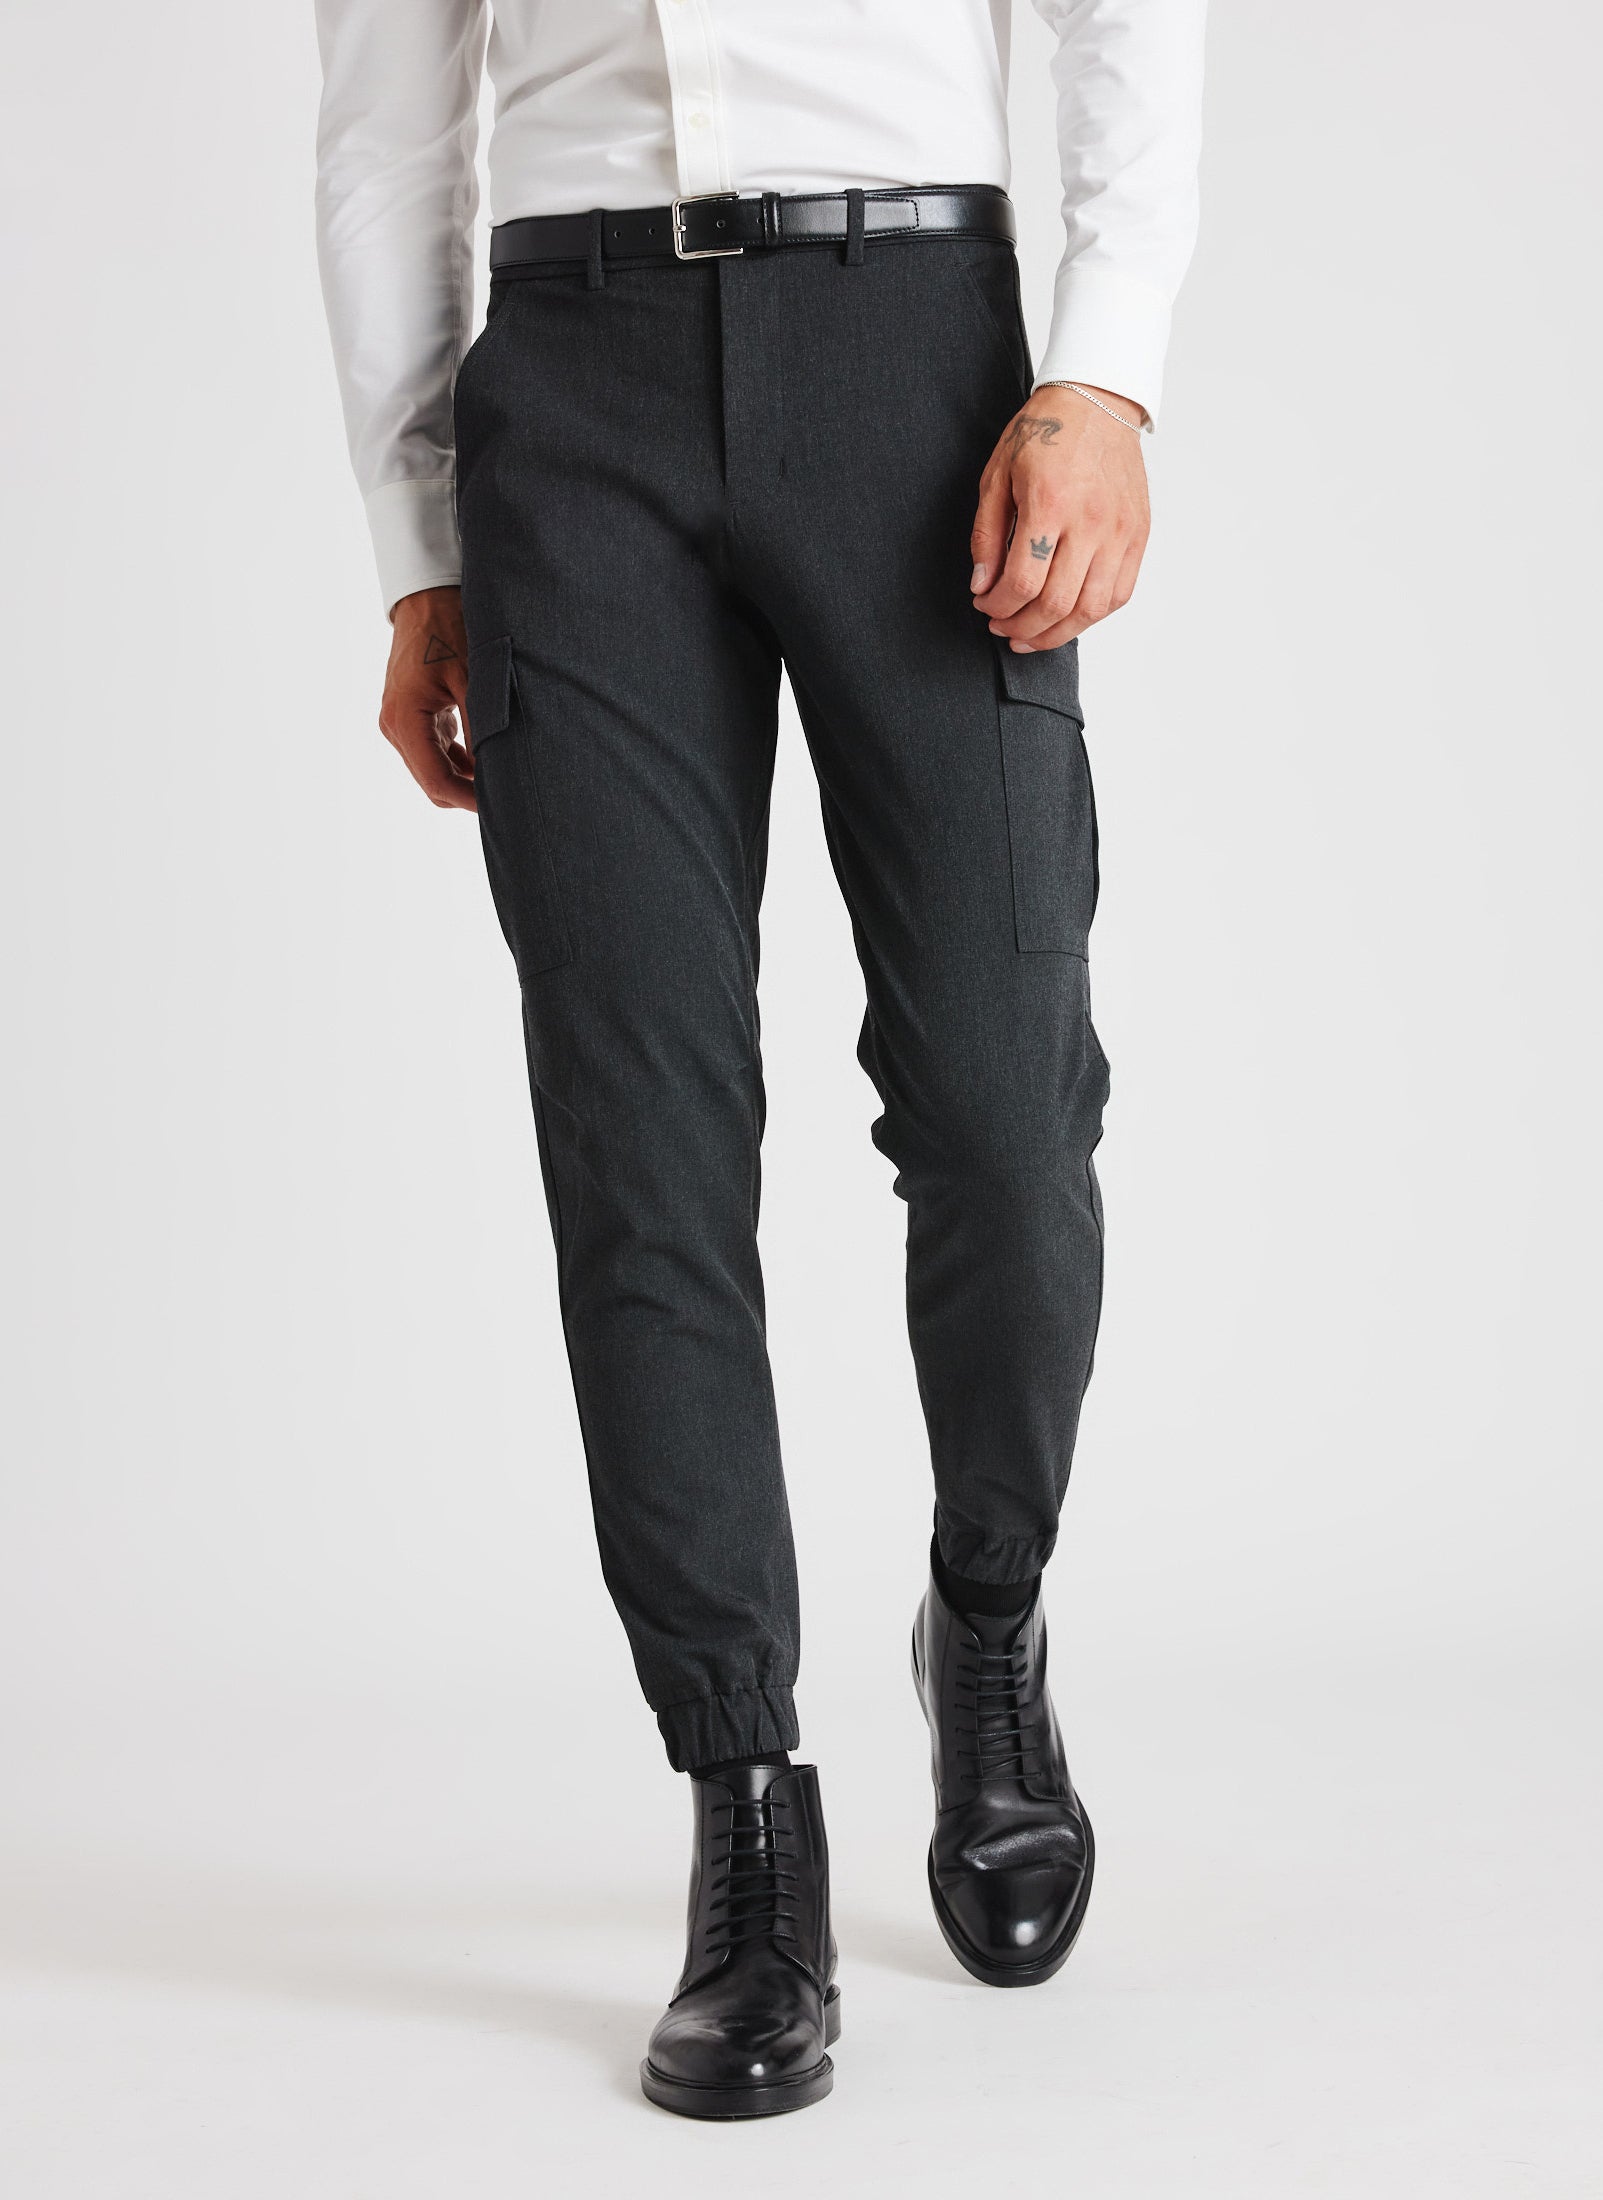 Kit and Ace — Recycled Suiting Cargo Pants